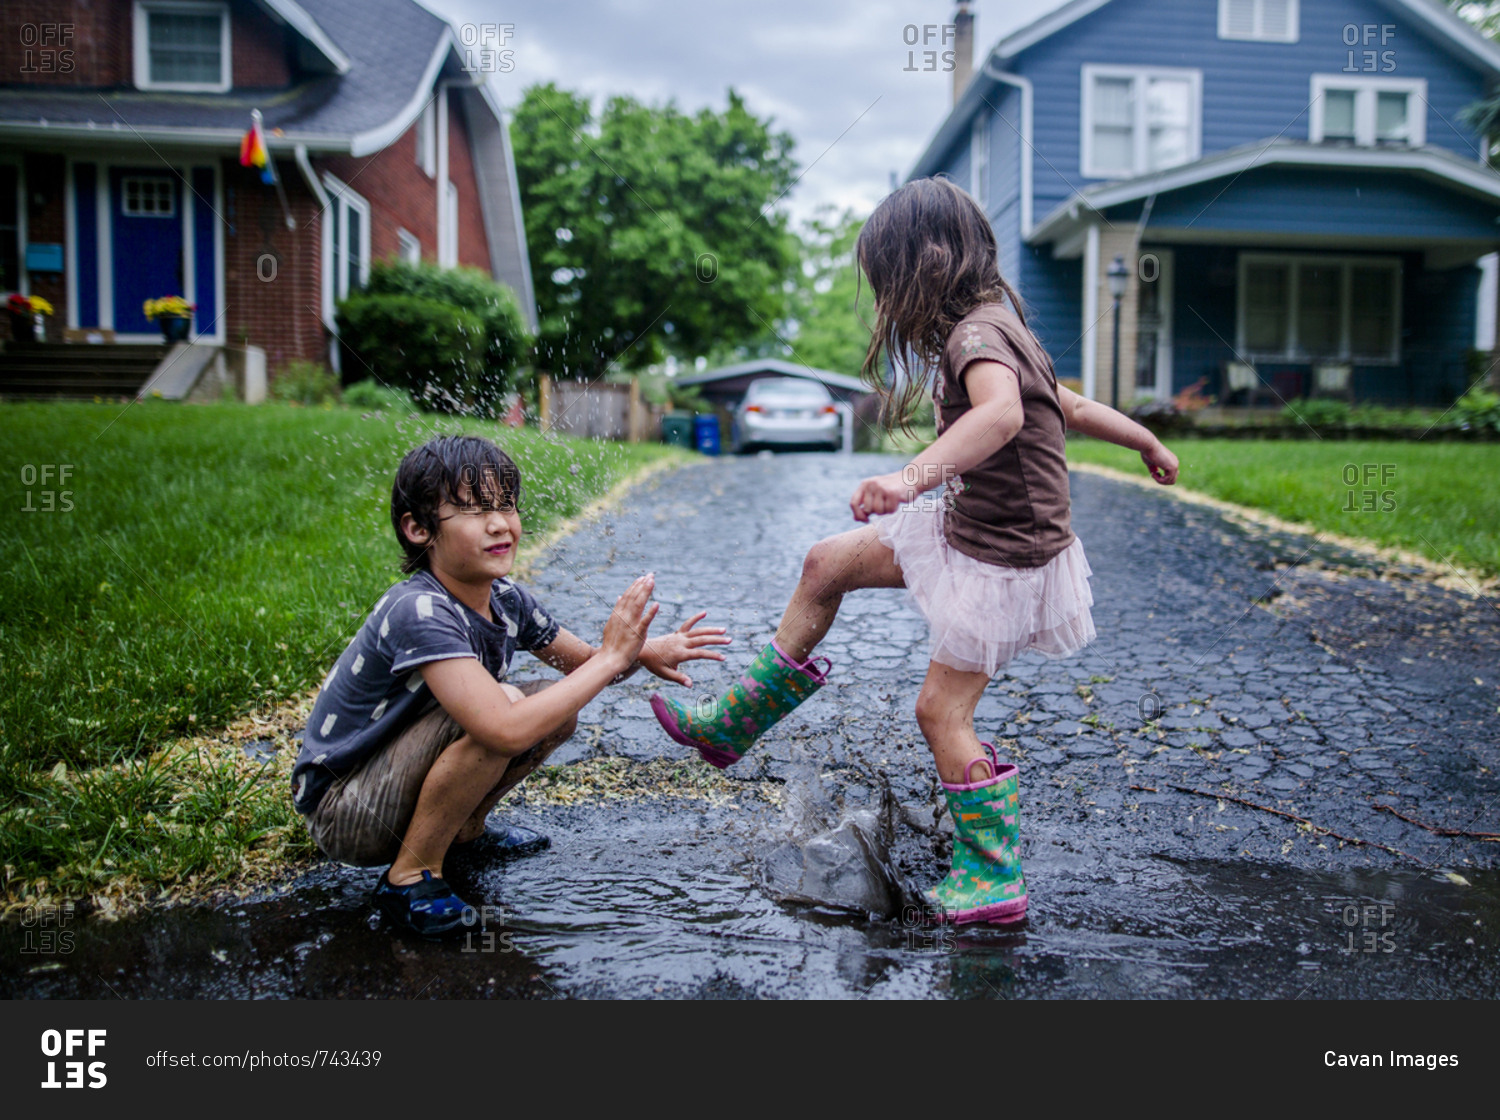 Side view of playful sister splashing puddle on brother during rainy season